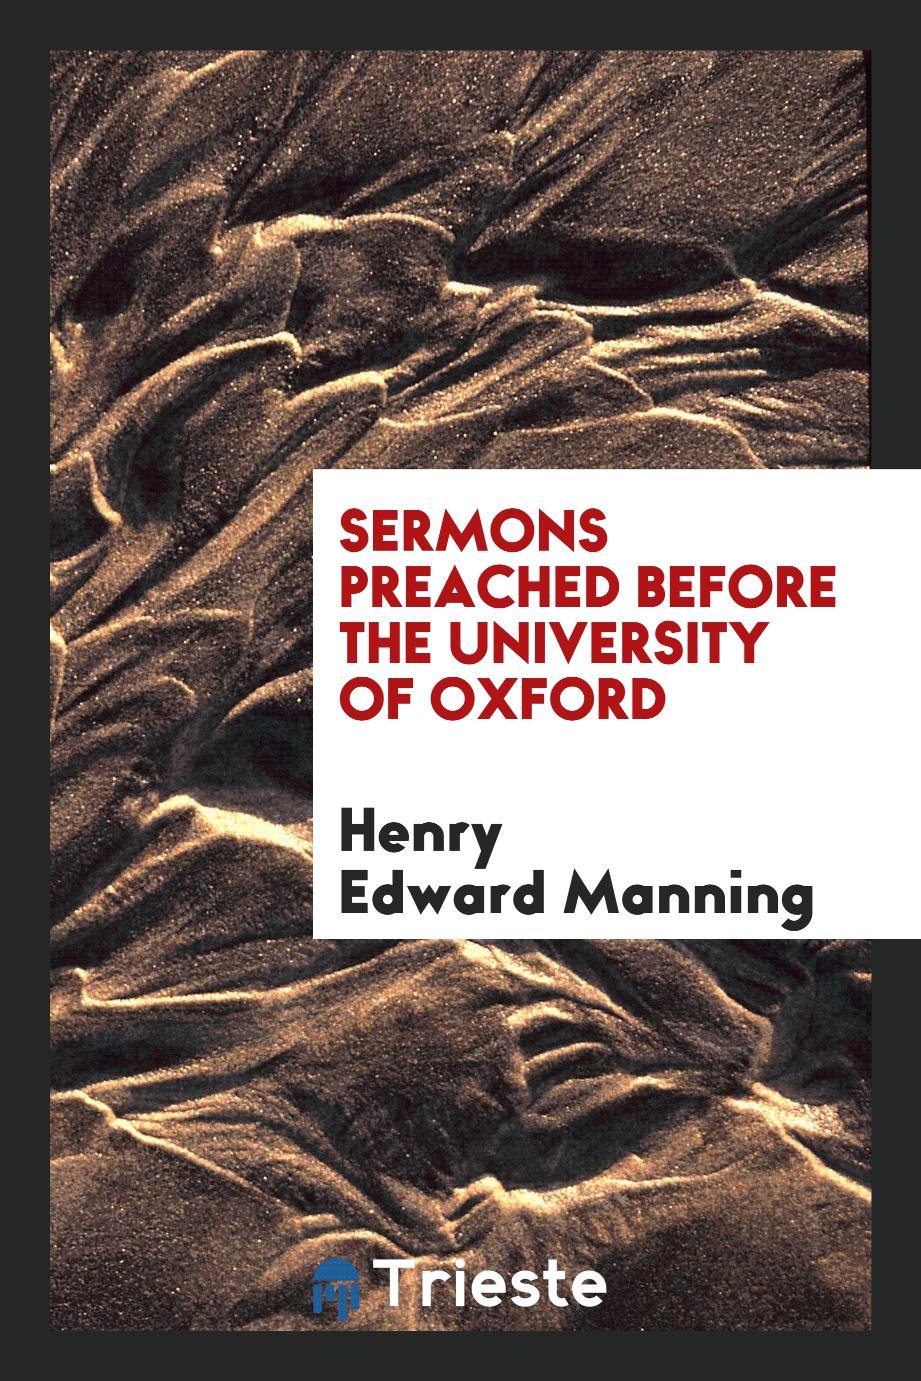 Henry Edward Manning - Sermons preached before the University of Oxford